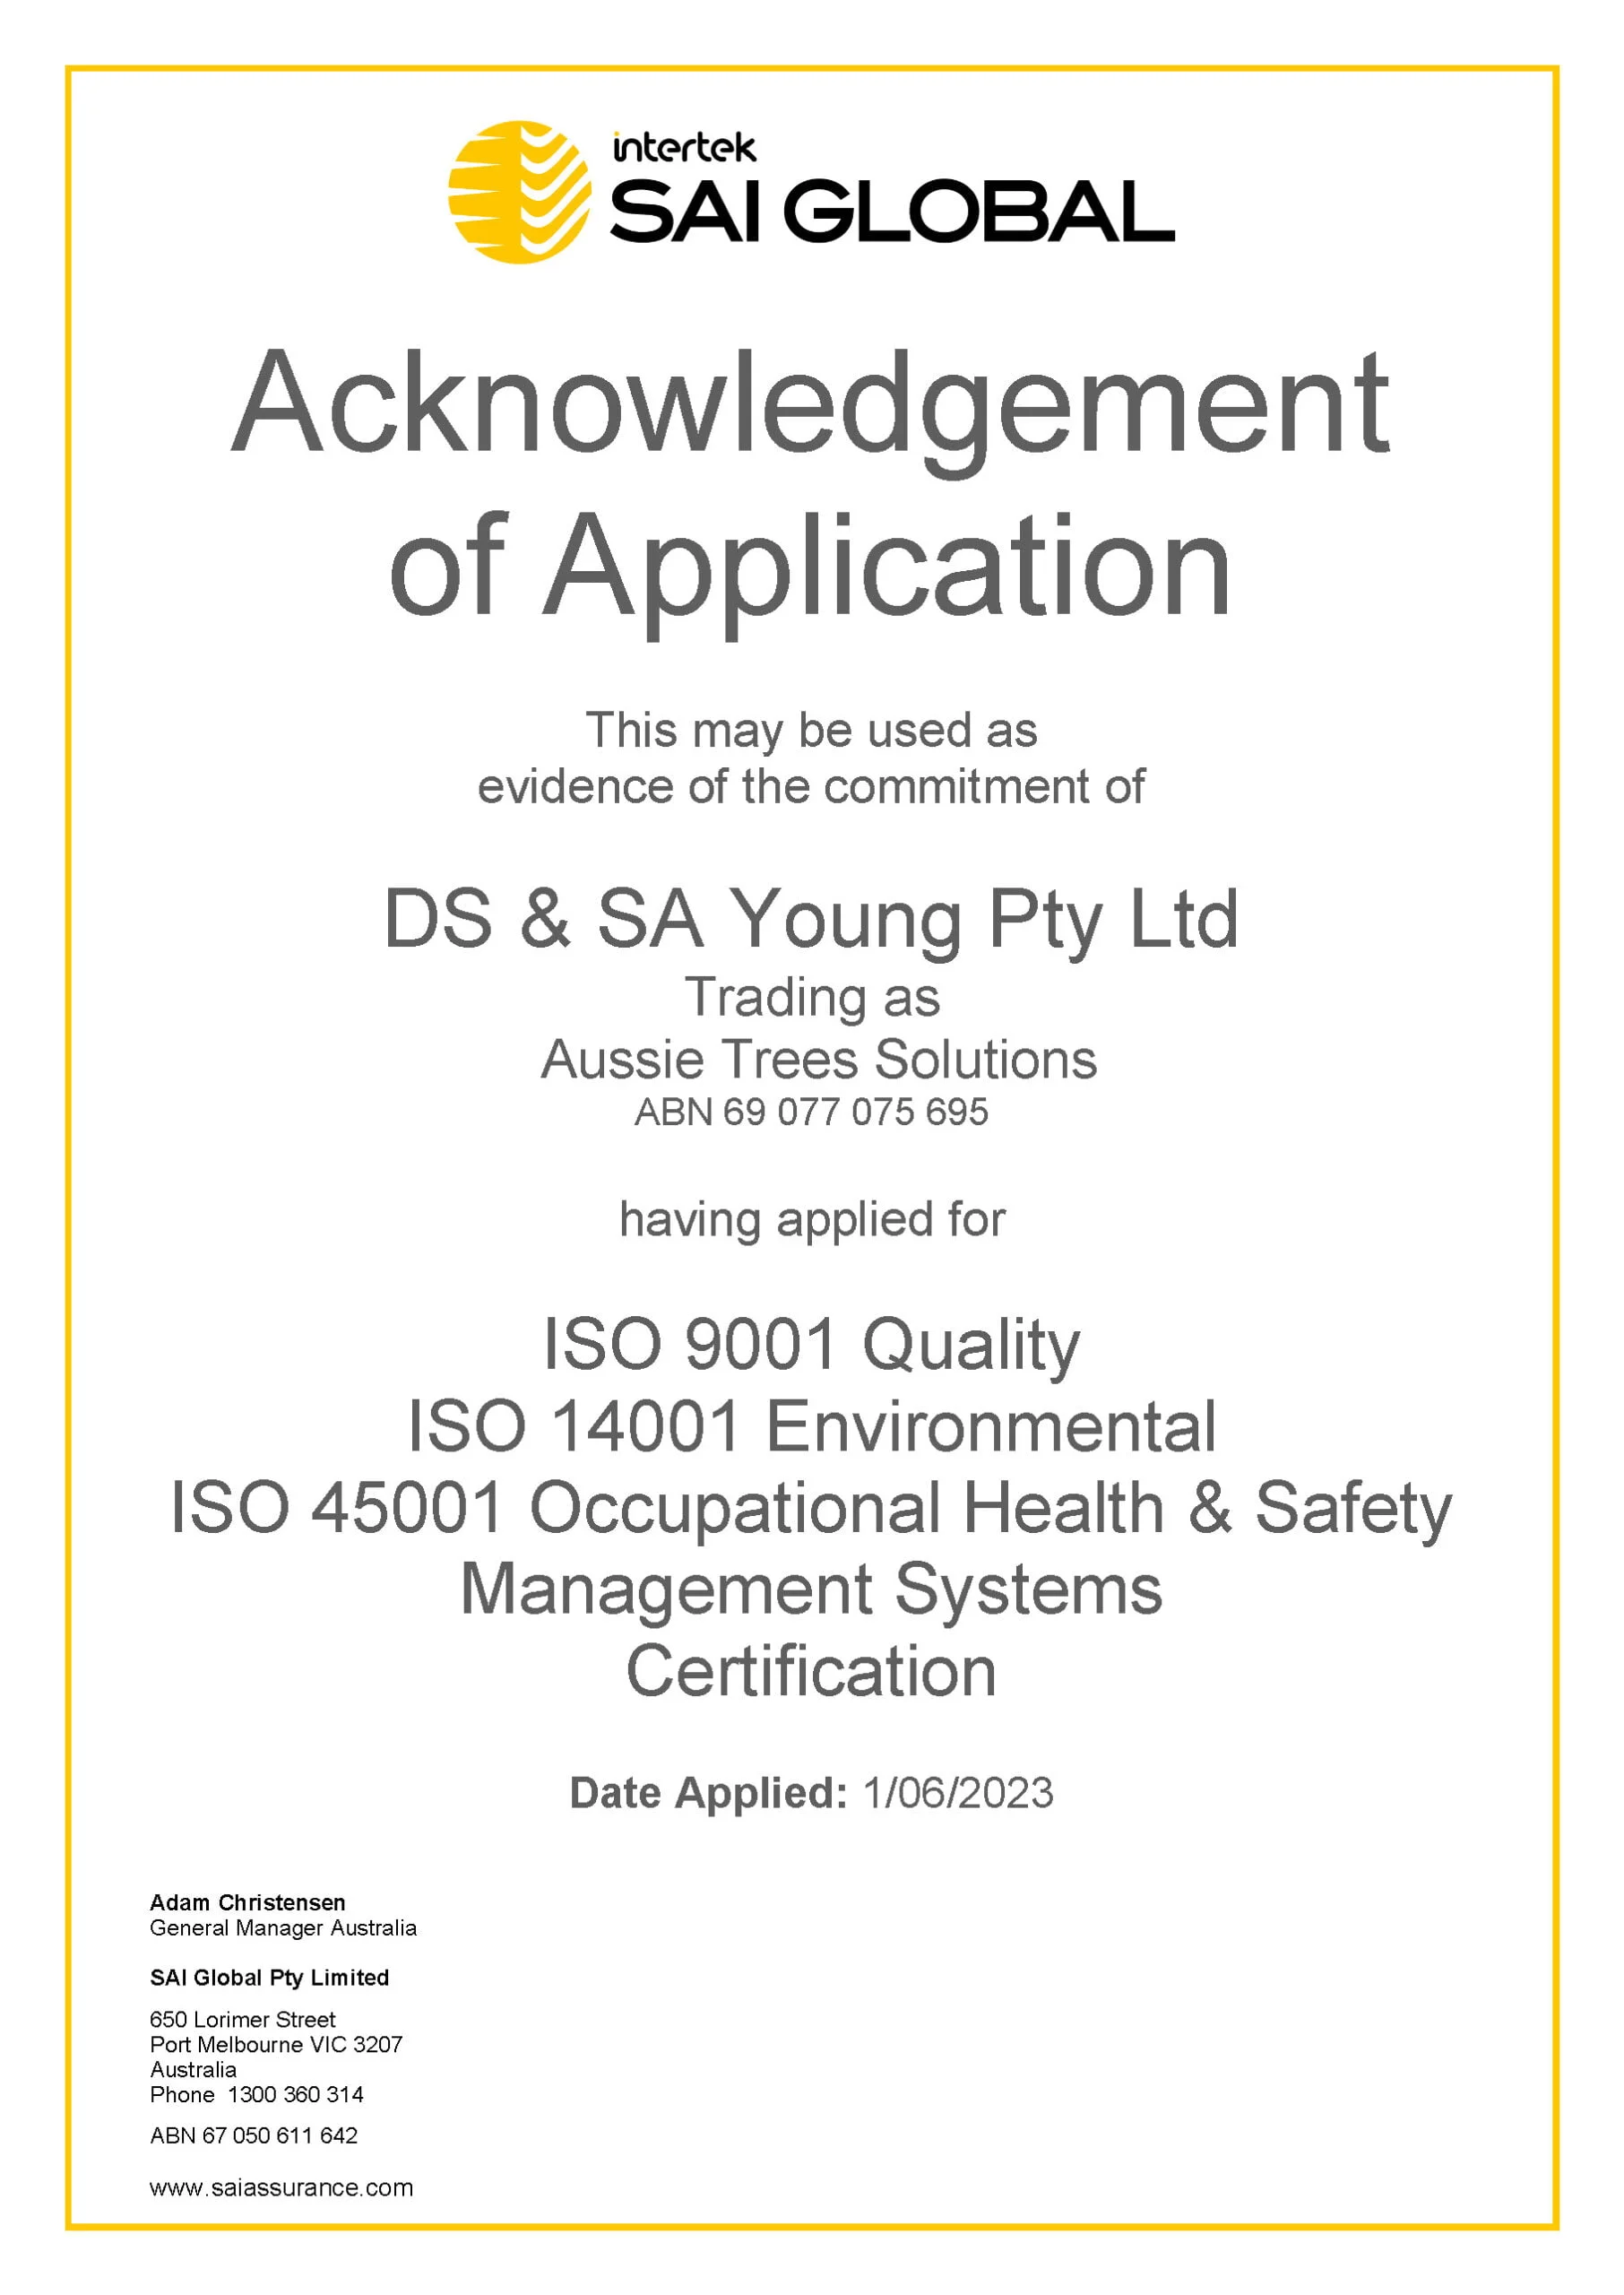 SAI GLOBAL Acknowledgement of Application Aussie Tree Solutions